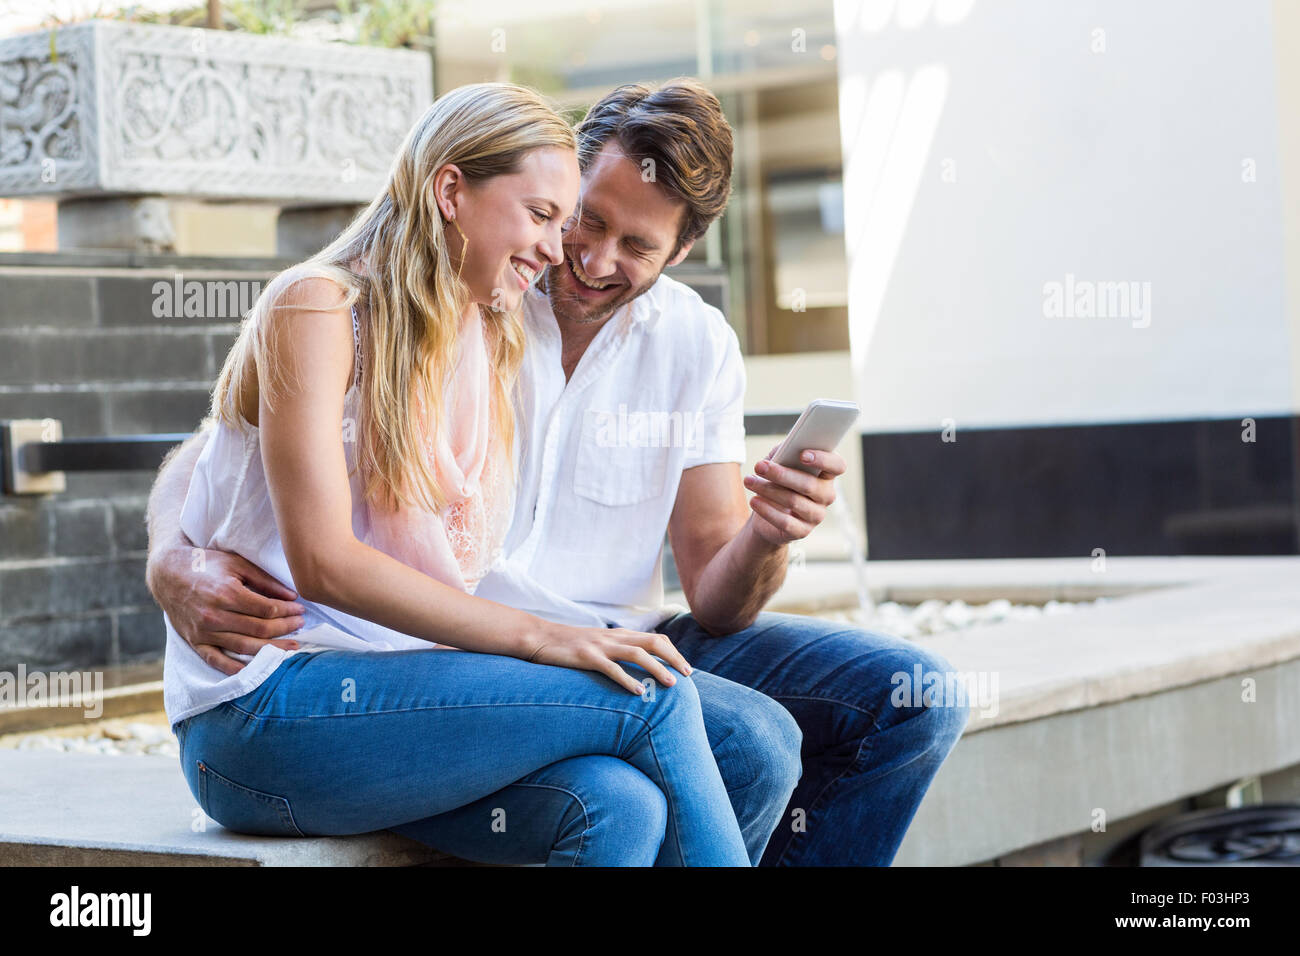 Happy couple sitting and laughing together Stock Photo